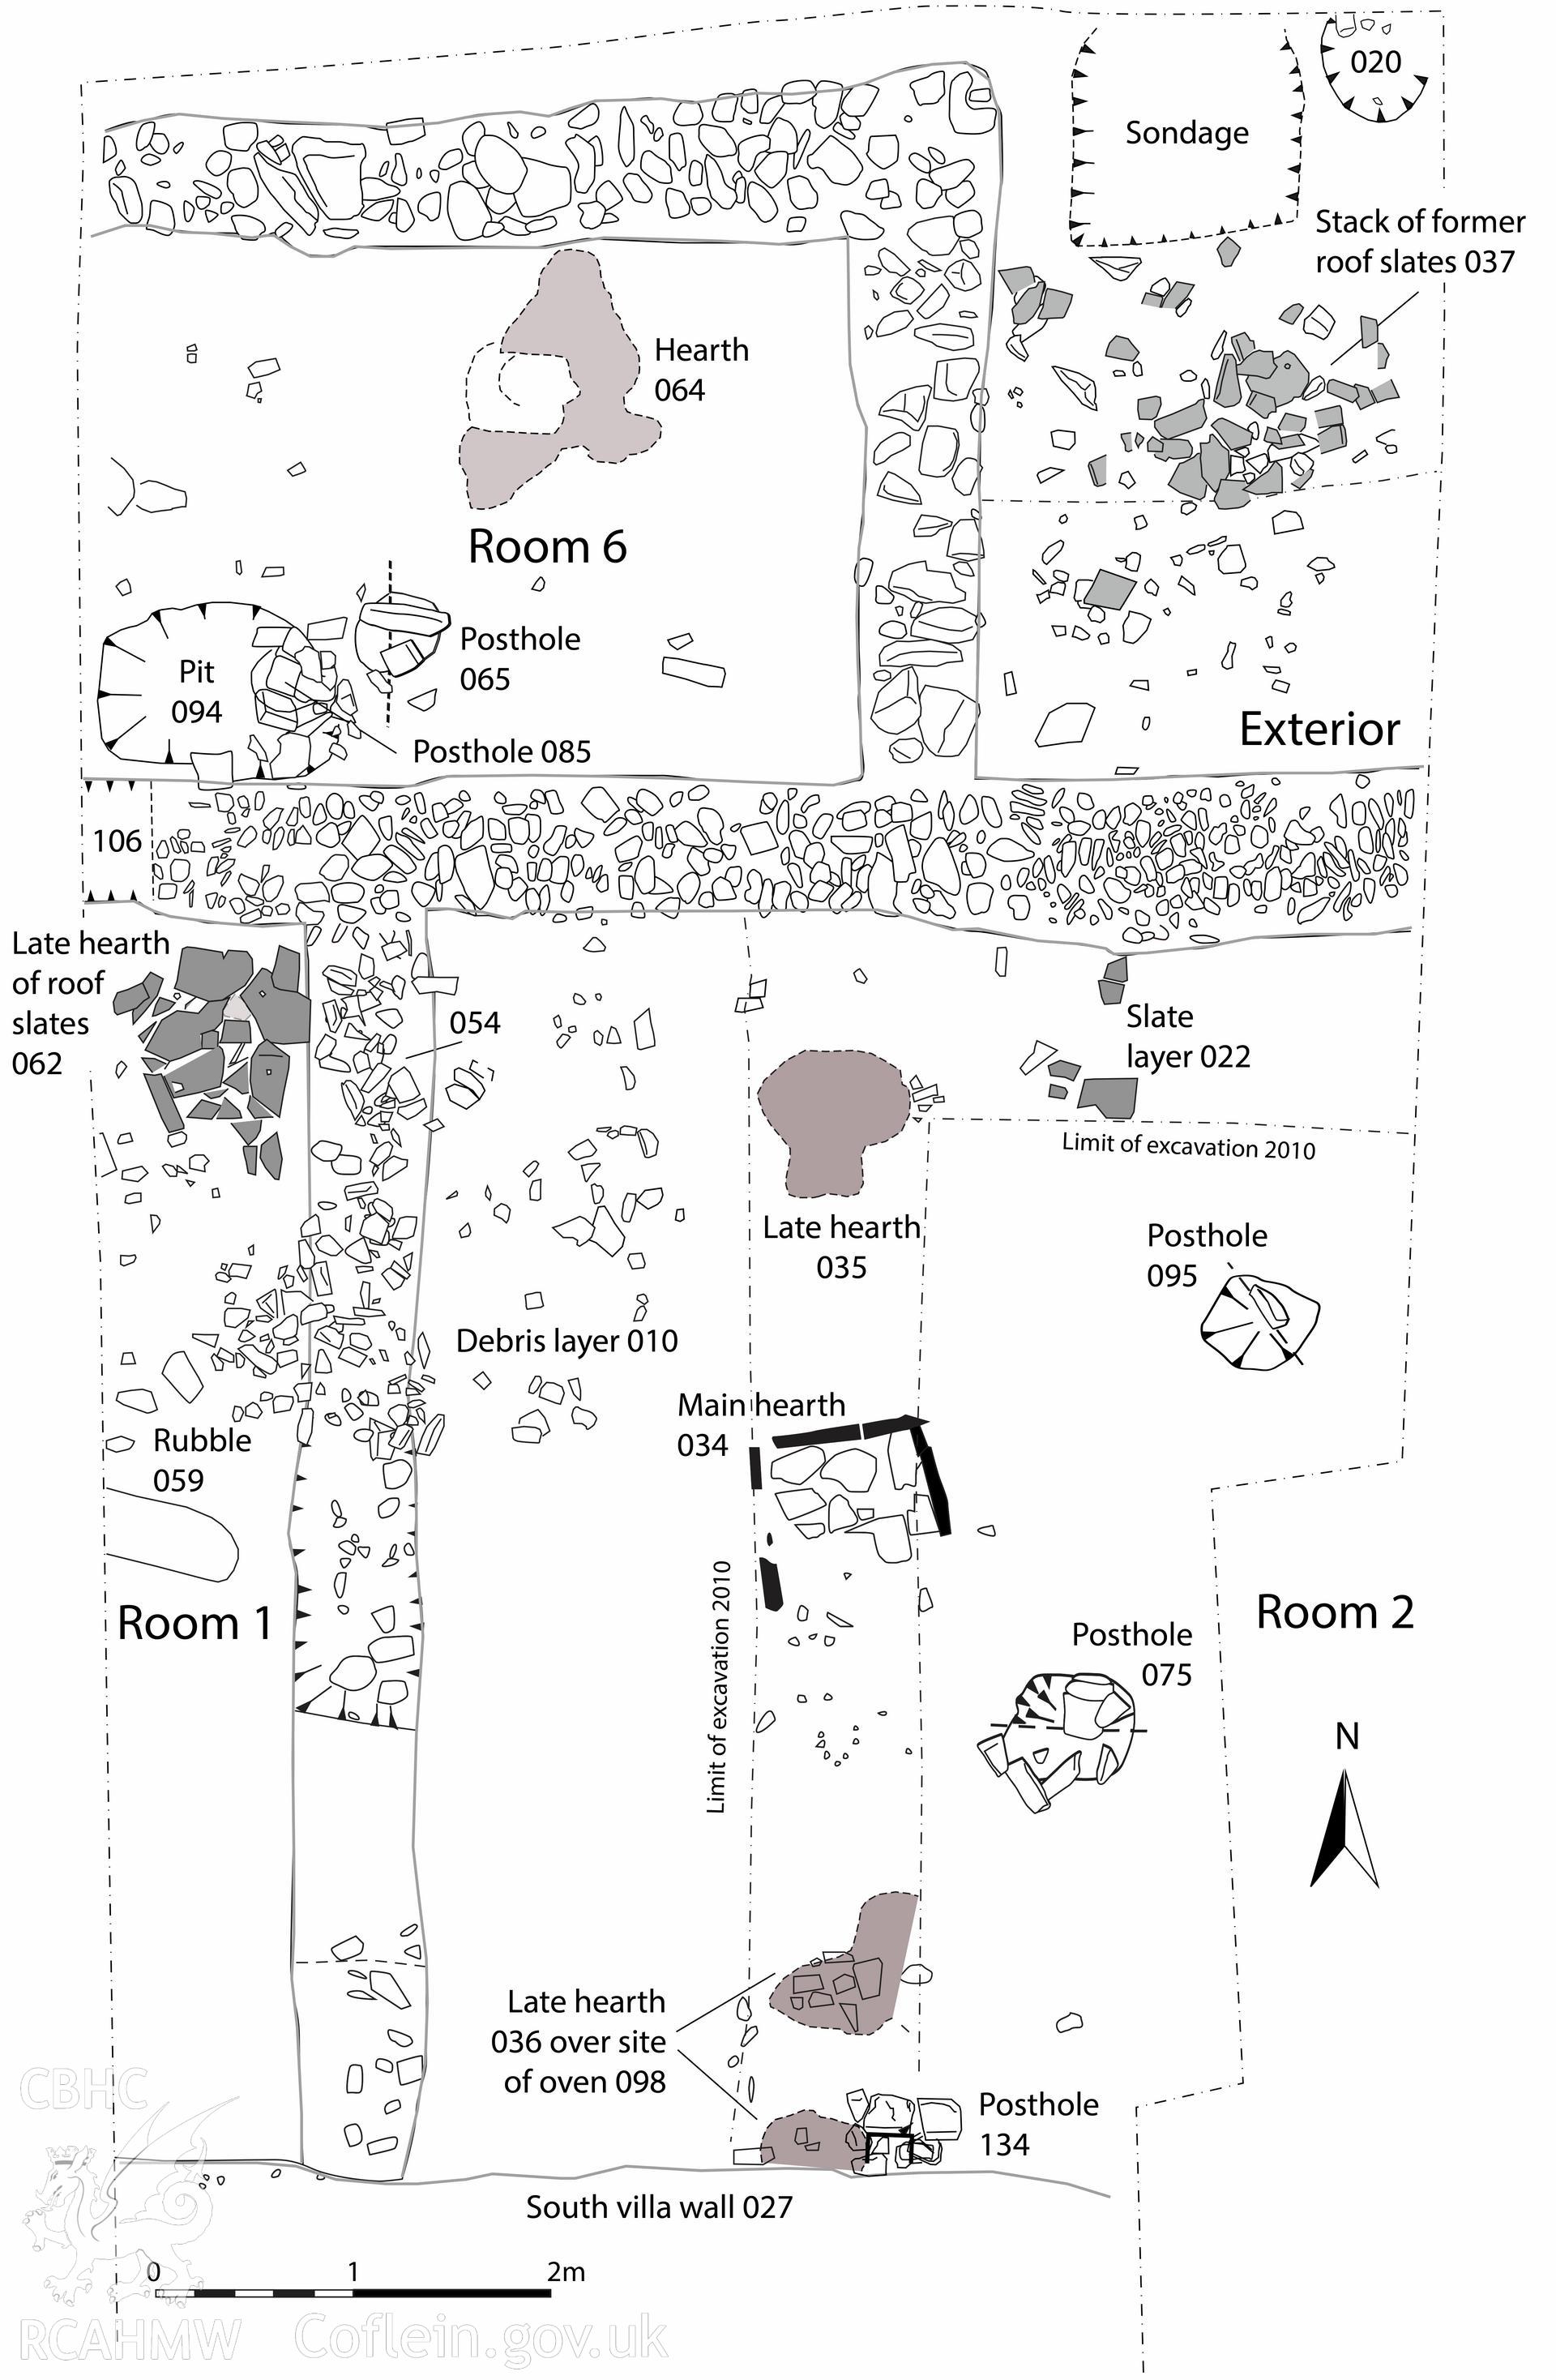 Arch Camb 167 (2018) 143-219. "The Romano-British villa at Abermagwr, Ceredigion: excavations 2010-2015" by Davies and Driver. Web-friendly .tif version of Fig 13. Plan of features in central and northern area of the villa.